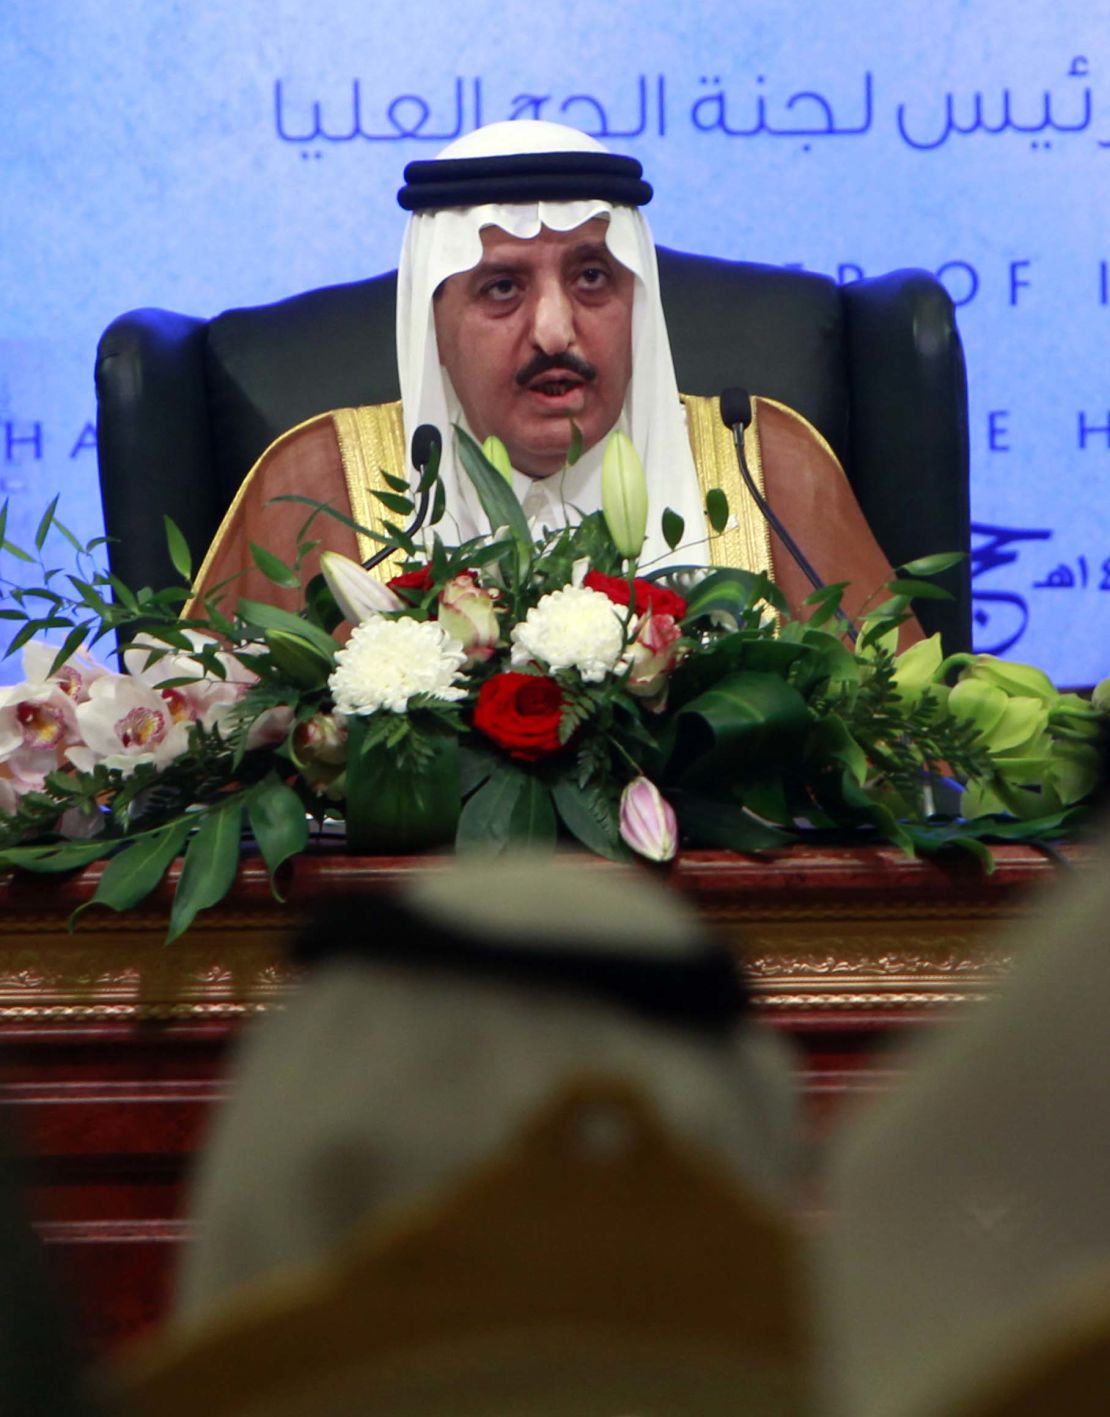 Prince Ahmed bin Abdulaziz al Saud was among those detained, people familiar with the matter told the WSJ.